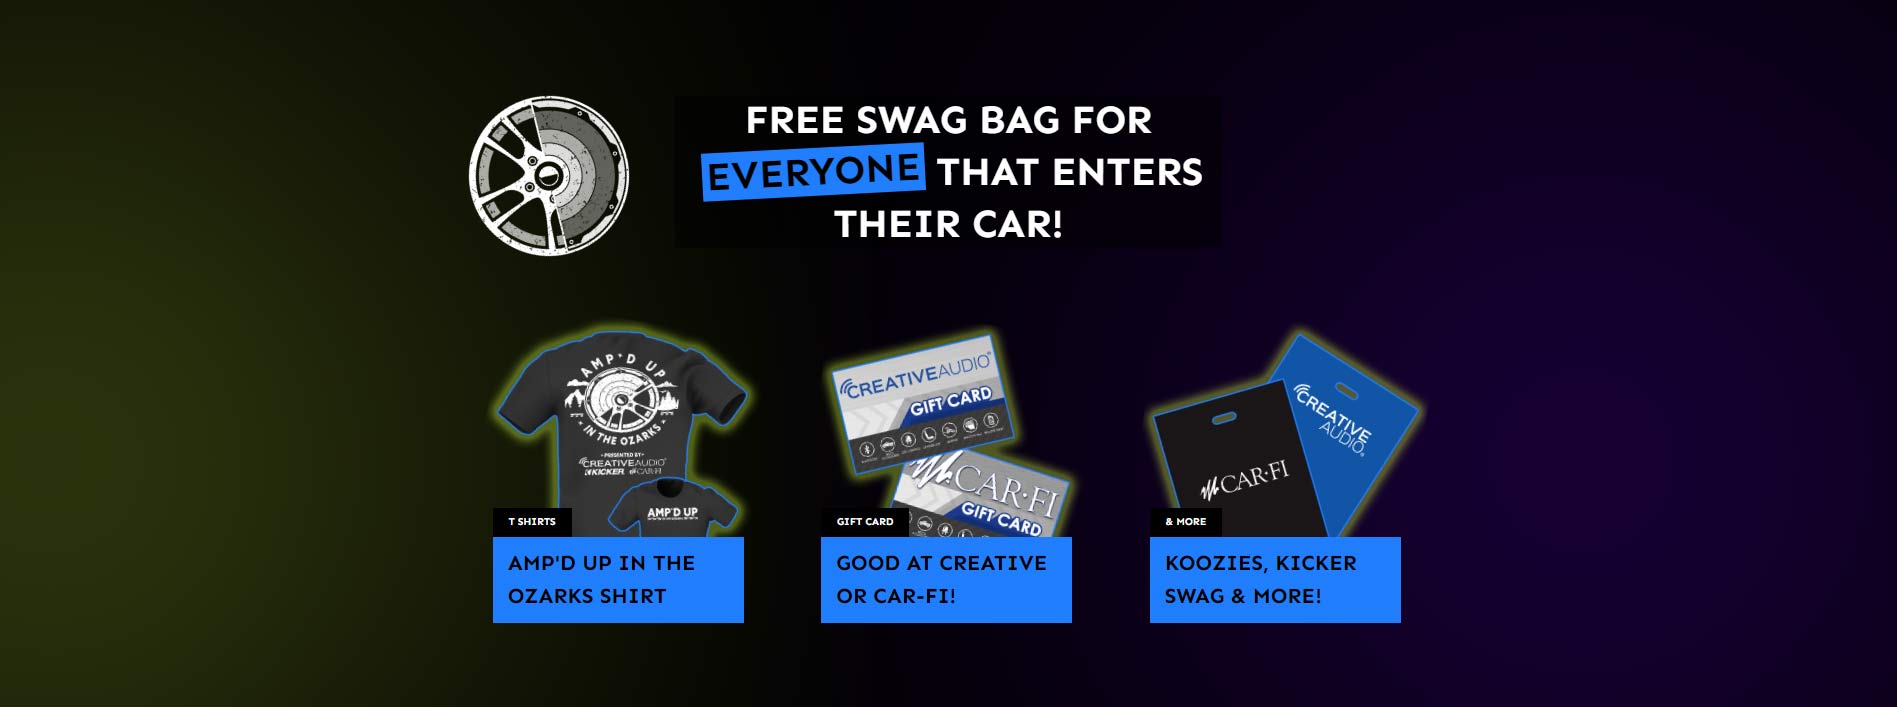 Free Swag included with vehicle registration